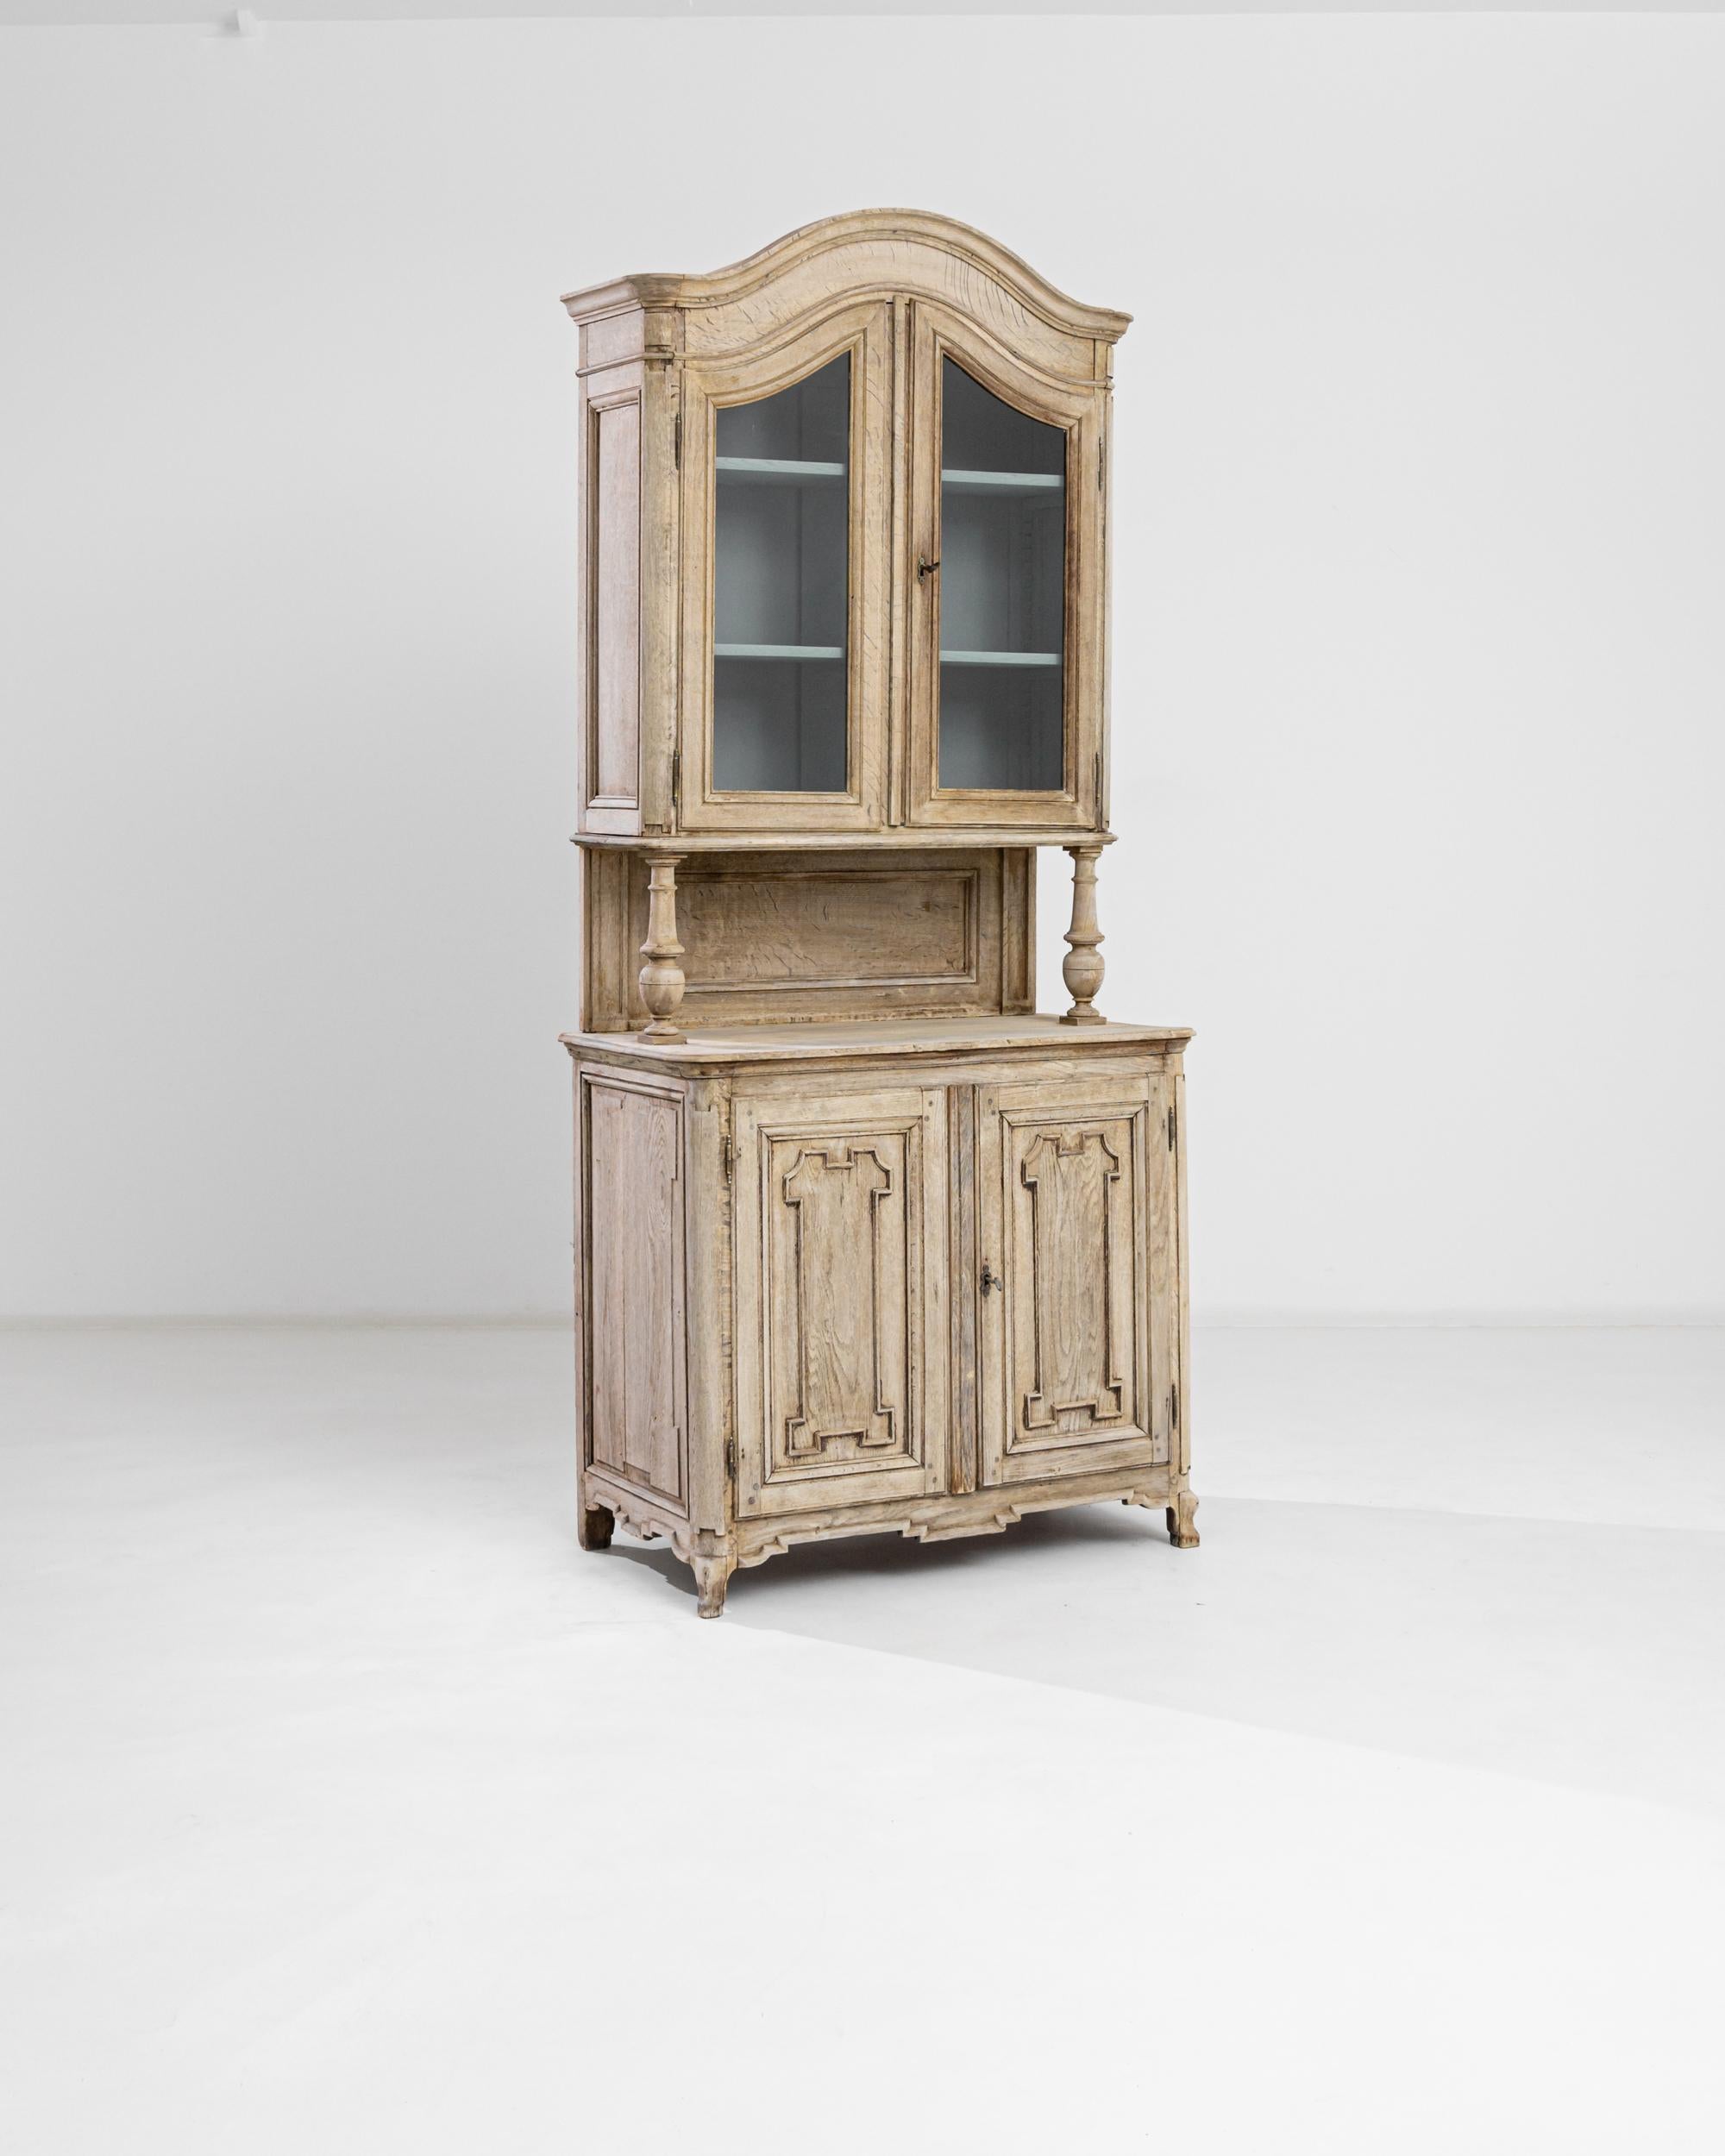 Explore the refined beauty of this 1850s French Bleached Oak Vitrine, an exquisite blend of elegance and country simplicity. Crafted in France during the 1800s, the graceful arch of the cornice harmoniously mirrors the lower cupboard doors, creating